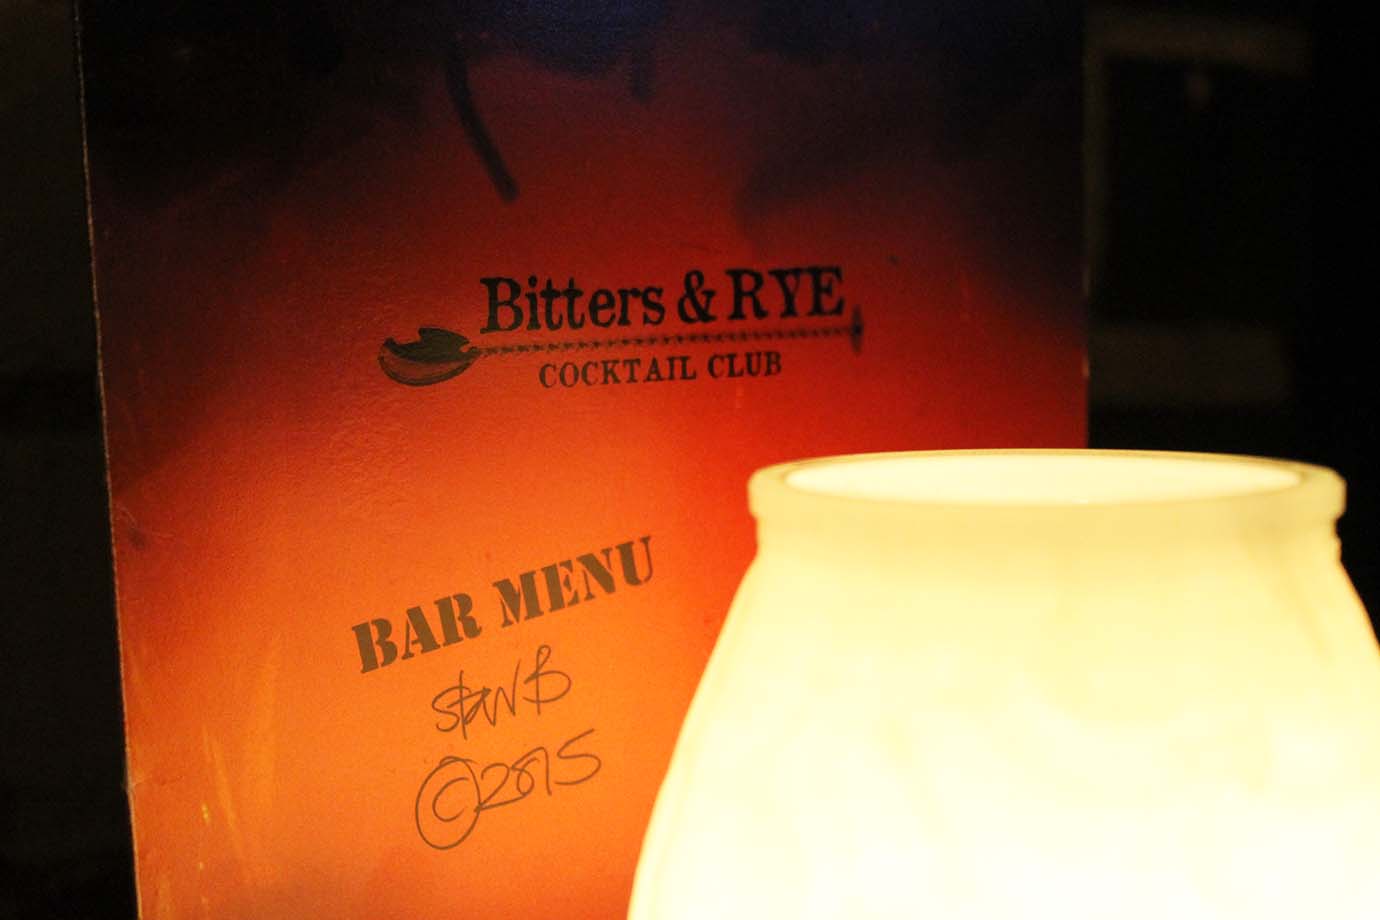 Cake + Whisky | Bitters & Rye | London's best cocktails